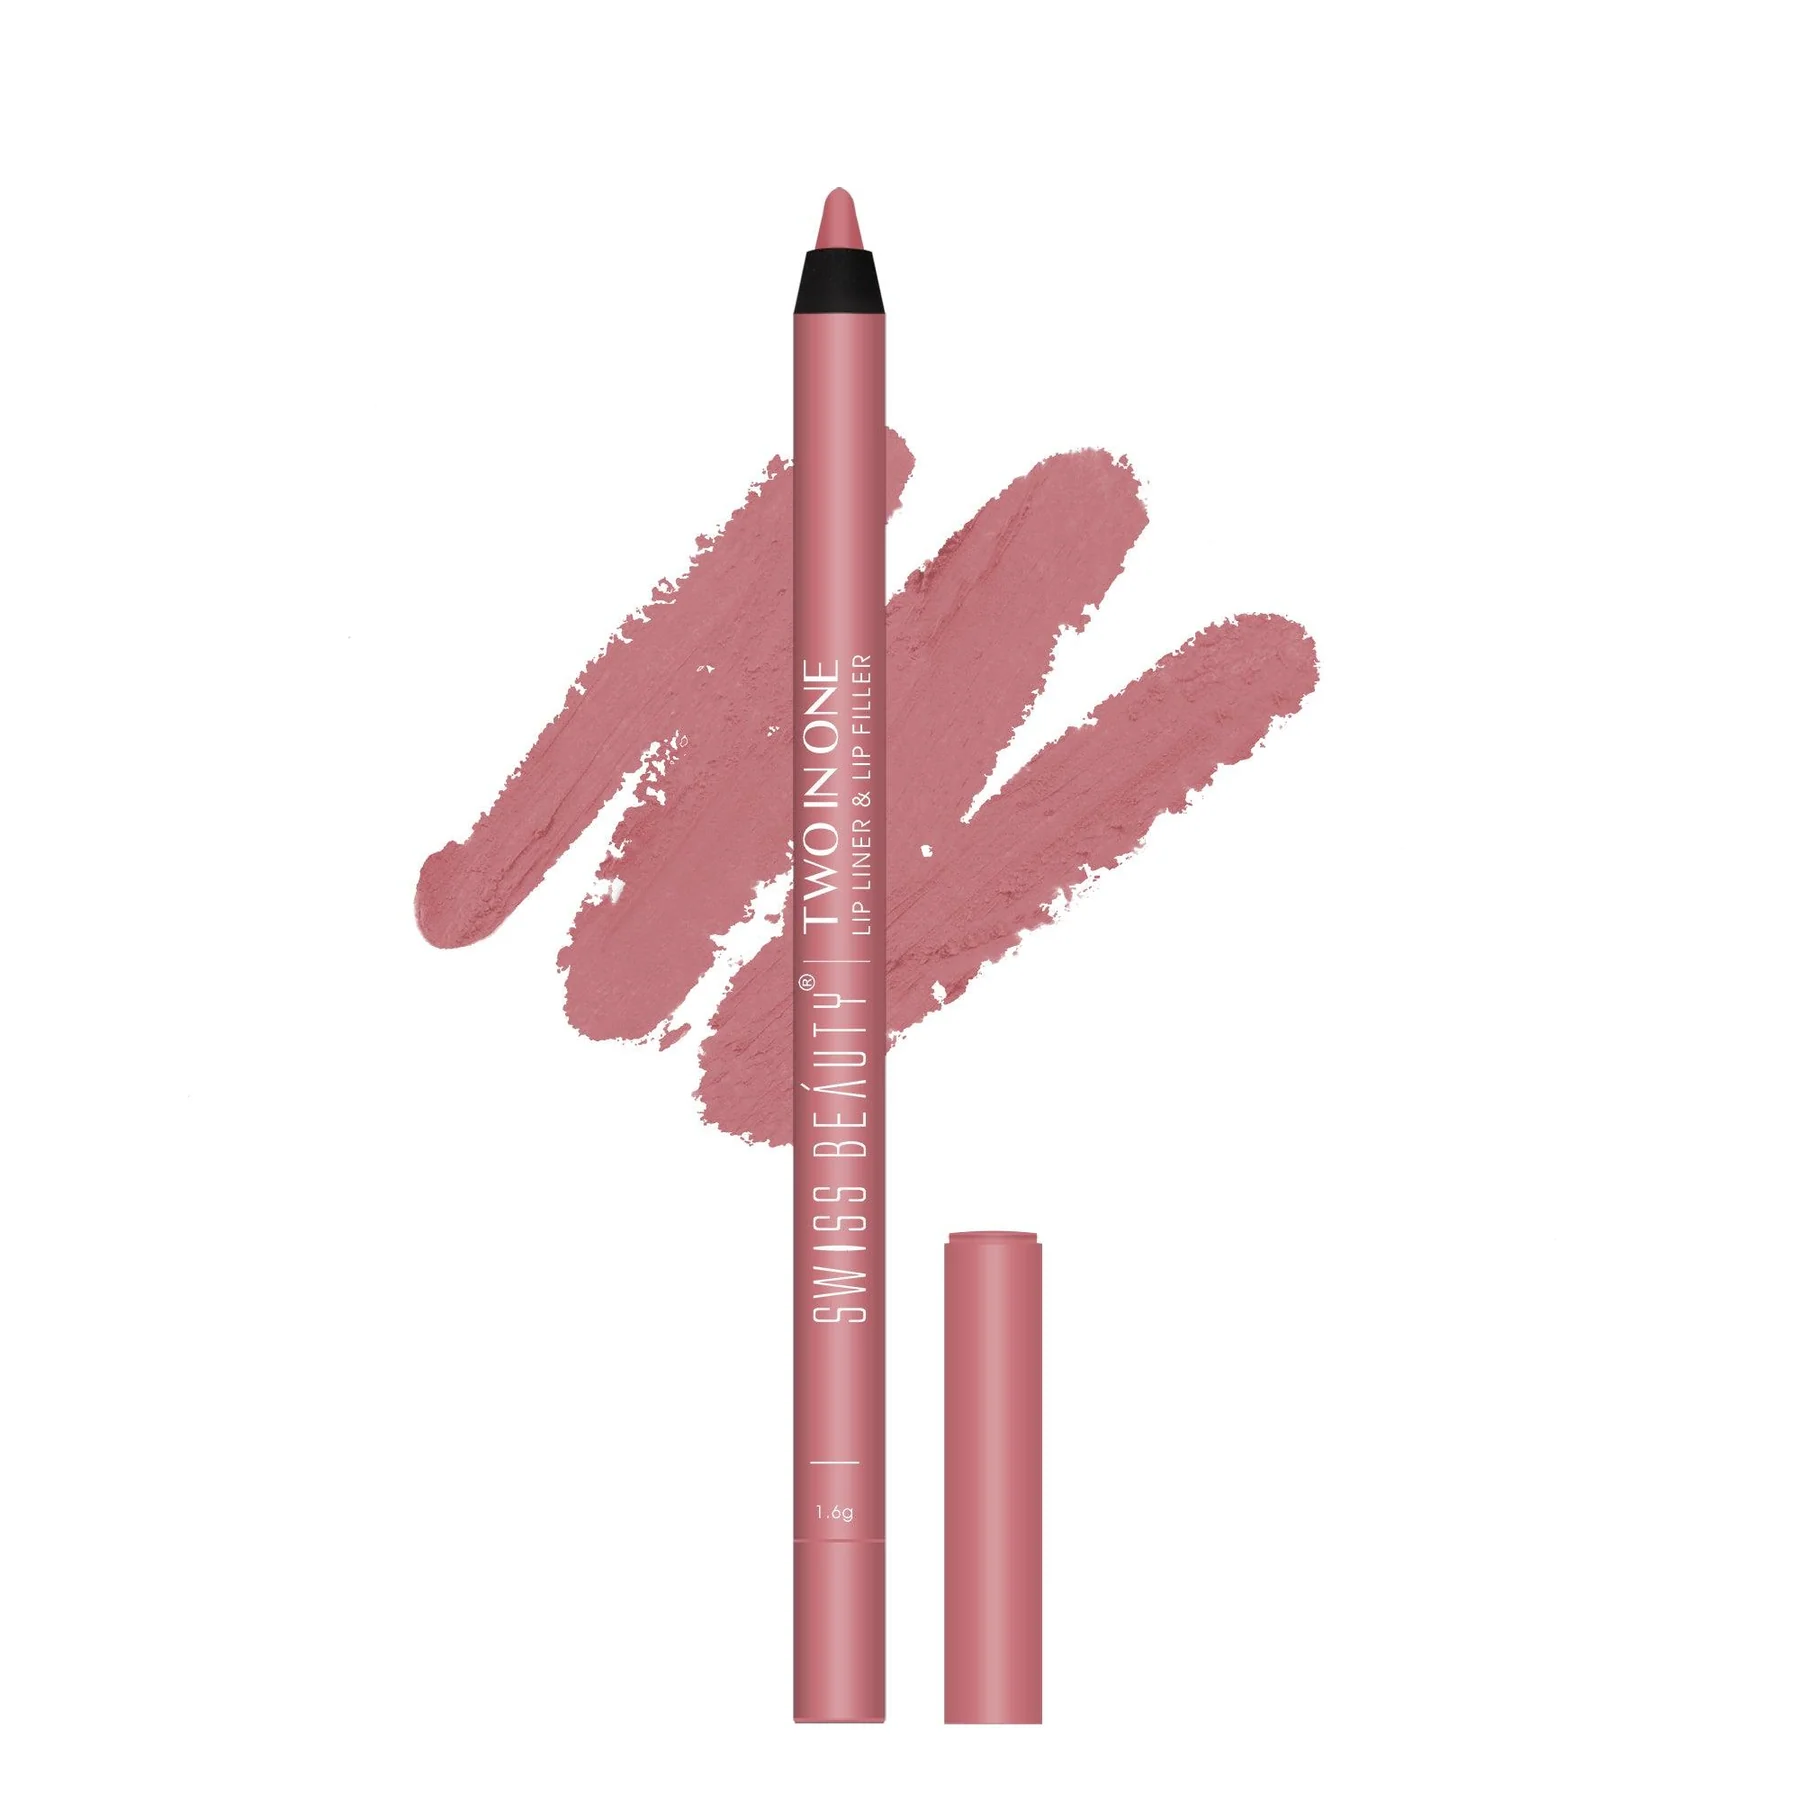 Swiss beauty two in one lip liner and lip filler